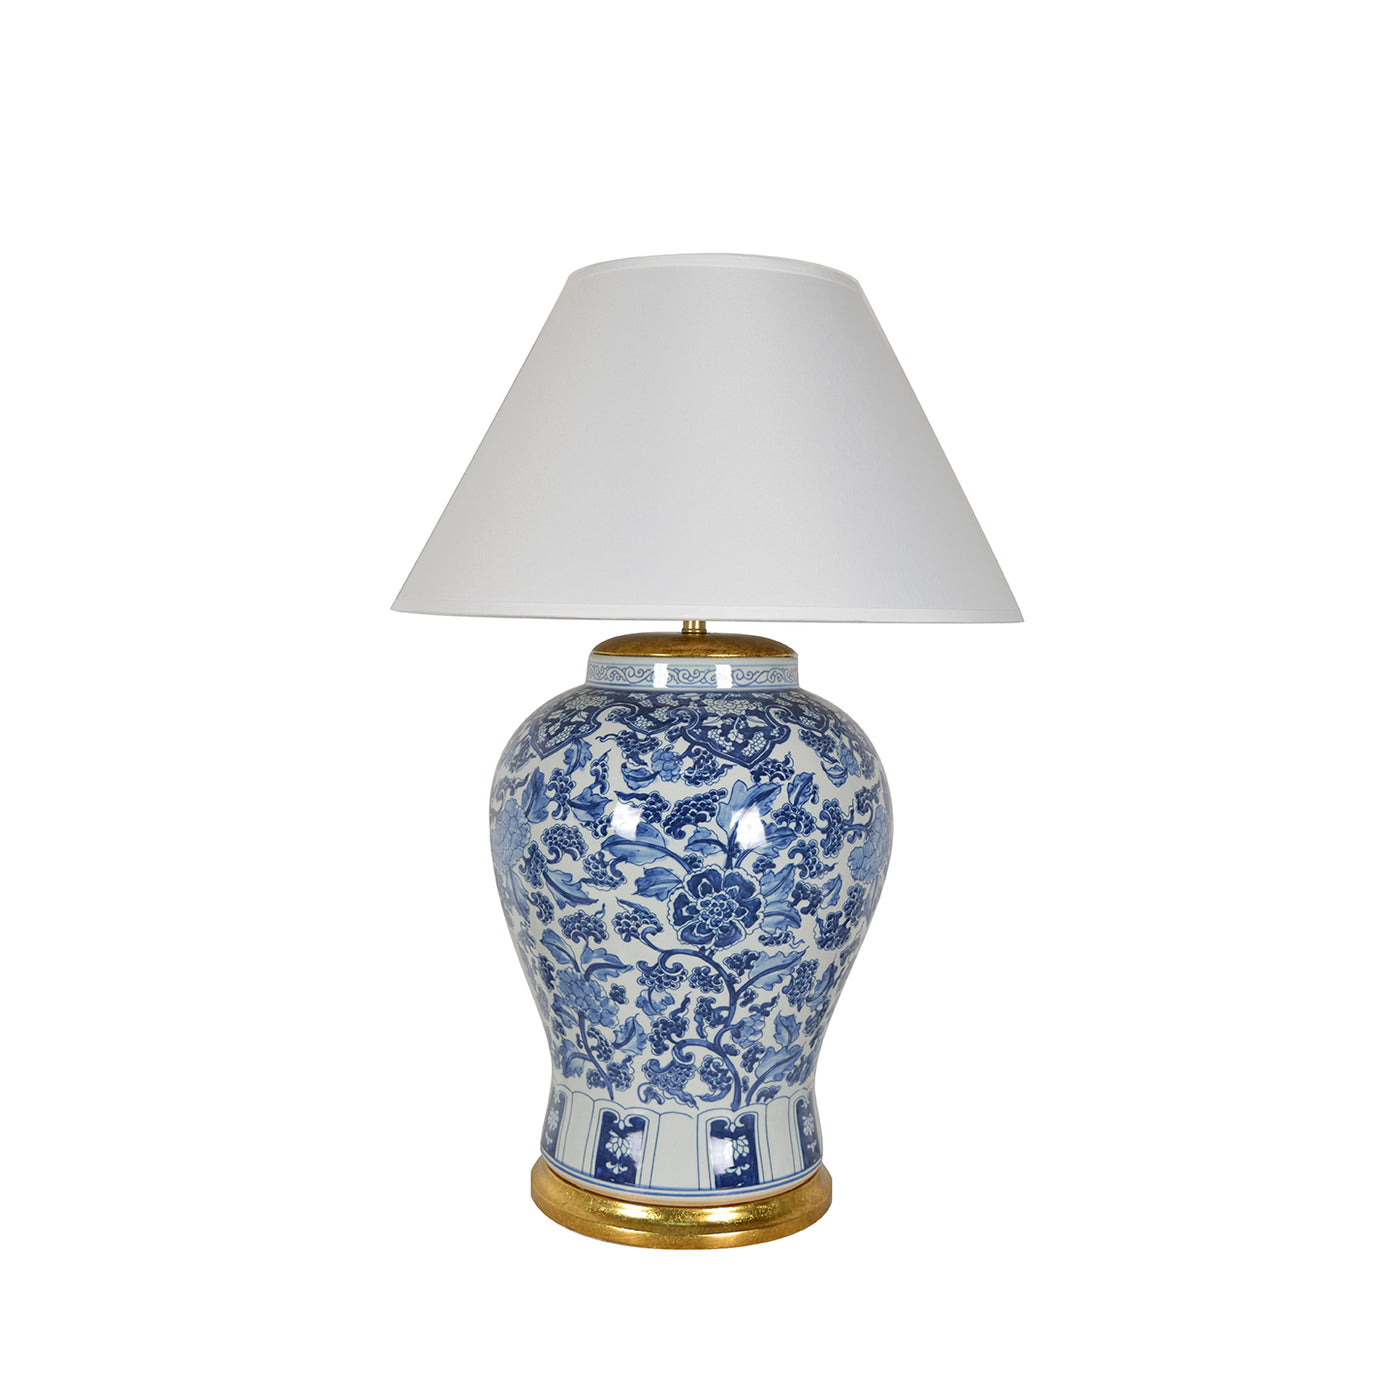 white and blue porcelain vase lamp with white empire shade